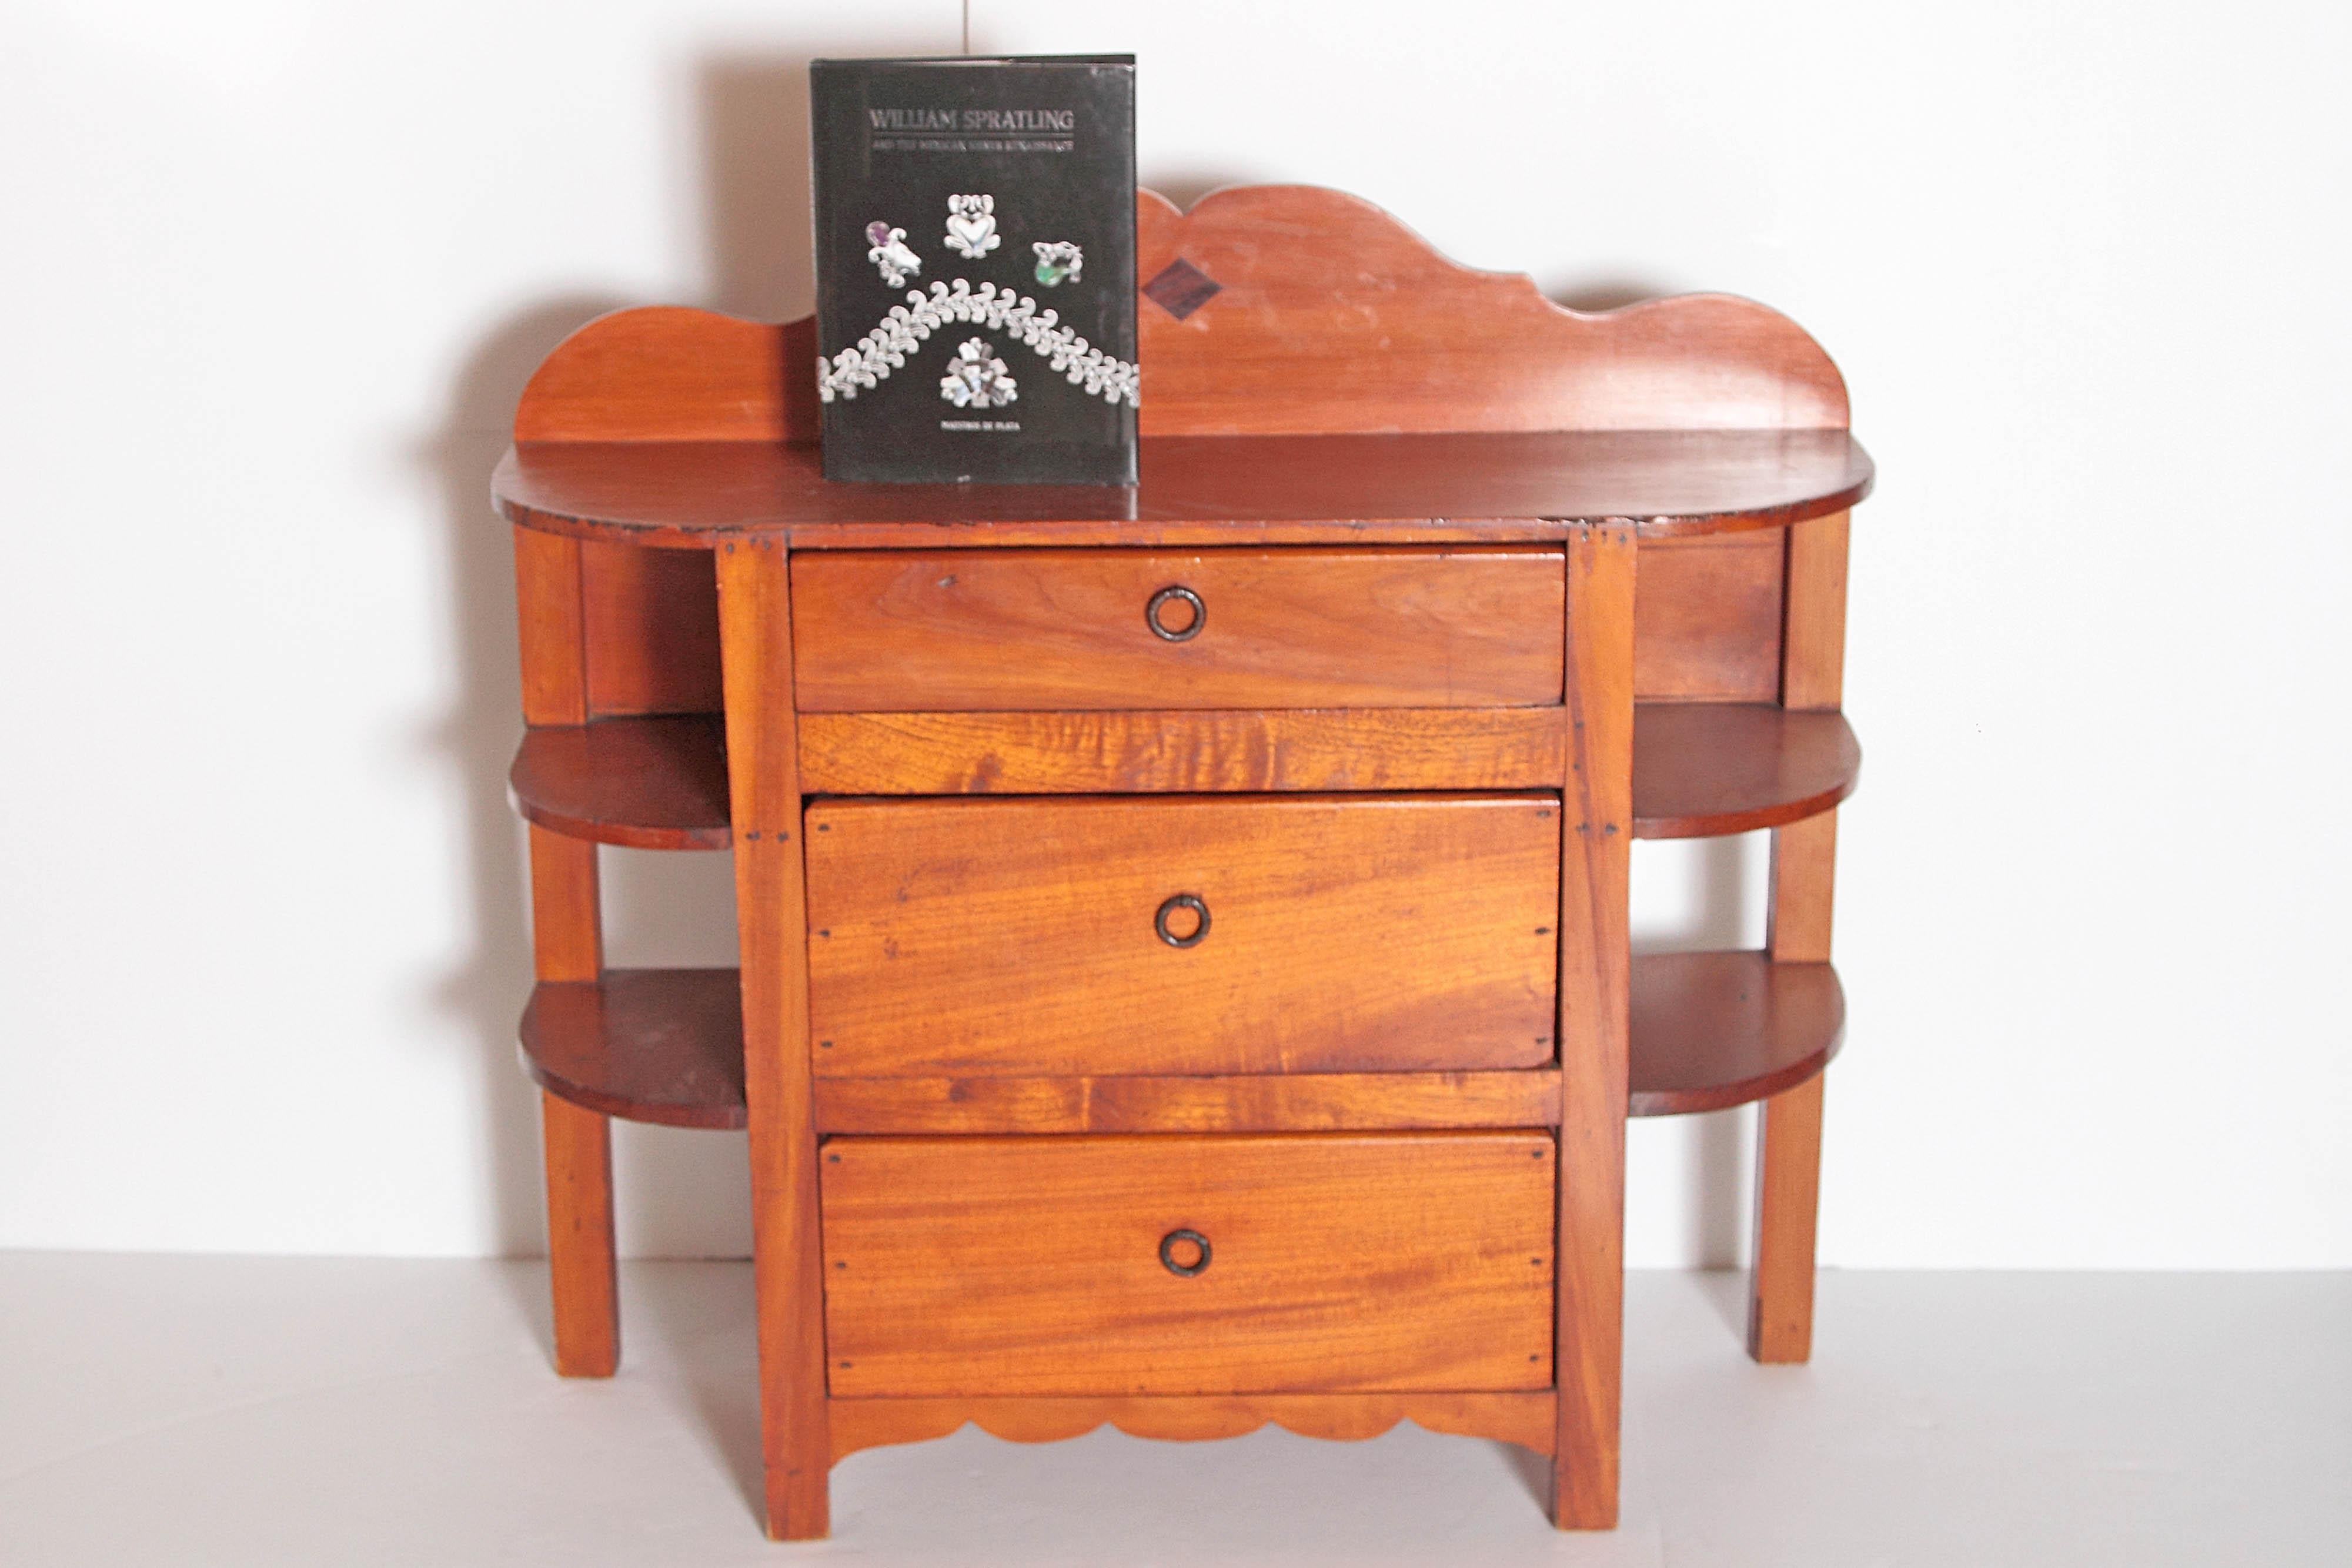 Mexican William Spratling Chest with Side Shelves